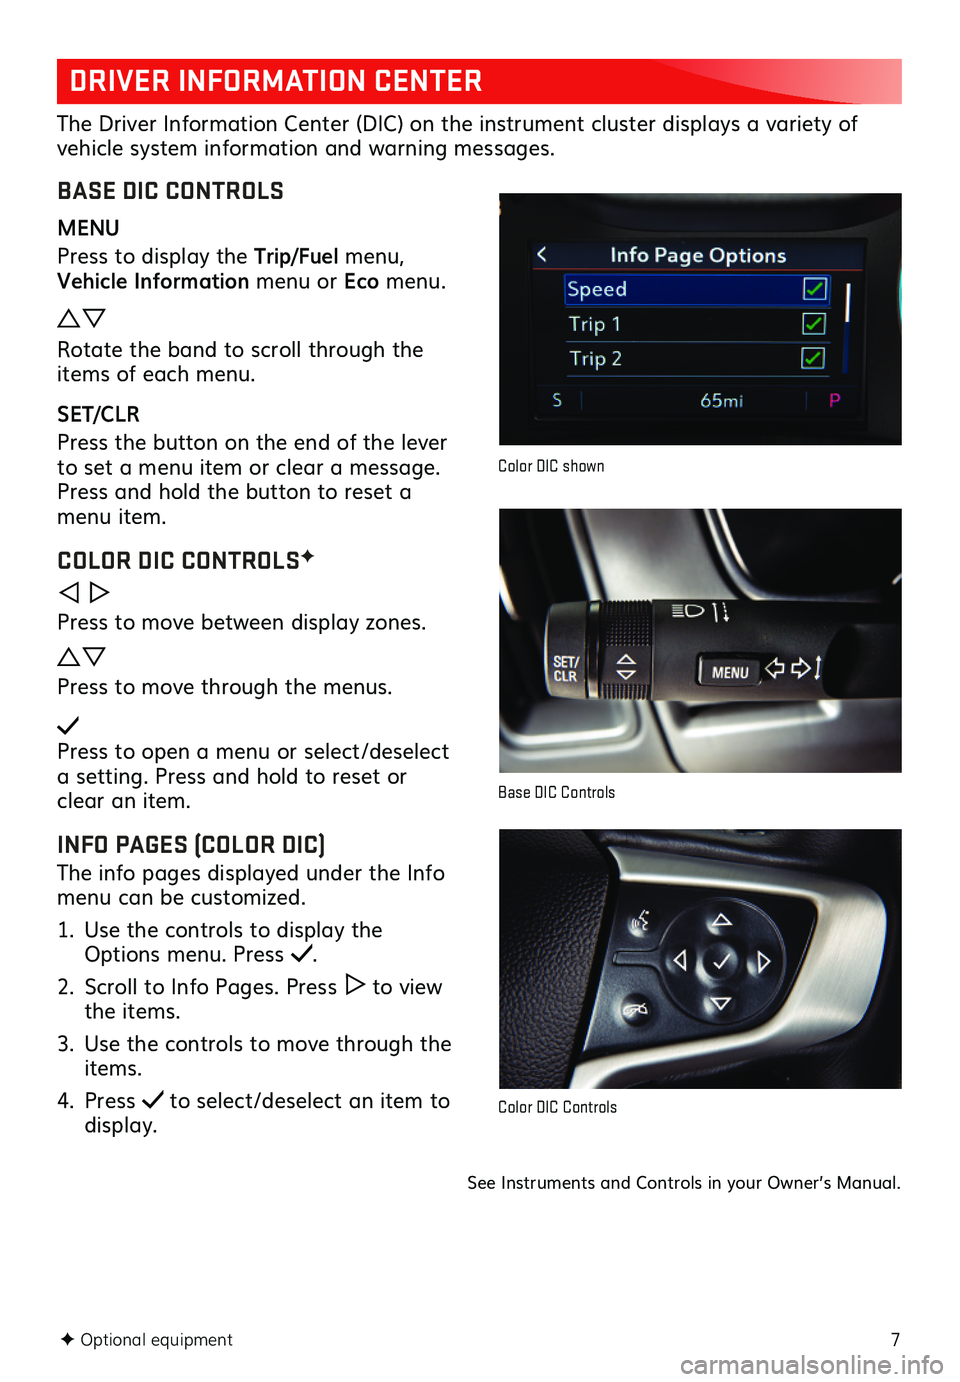 GMC CANYON 2019  Get To Know Guide 7
DRIVER INFORMATION CENTER
The Driver Information Center (DIC) on the instrument cluster displays a variety of vehicle system information and warning messages. 
BASE DIC CONTROLS
MENU
Press to displa